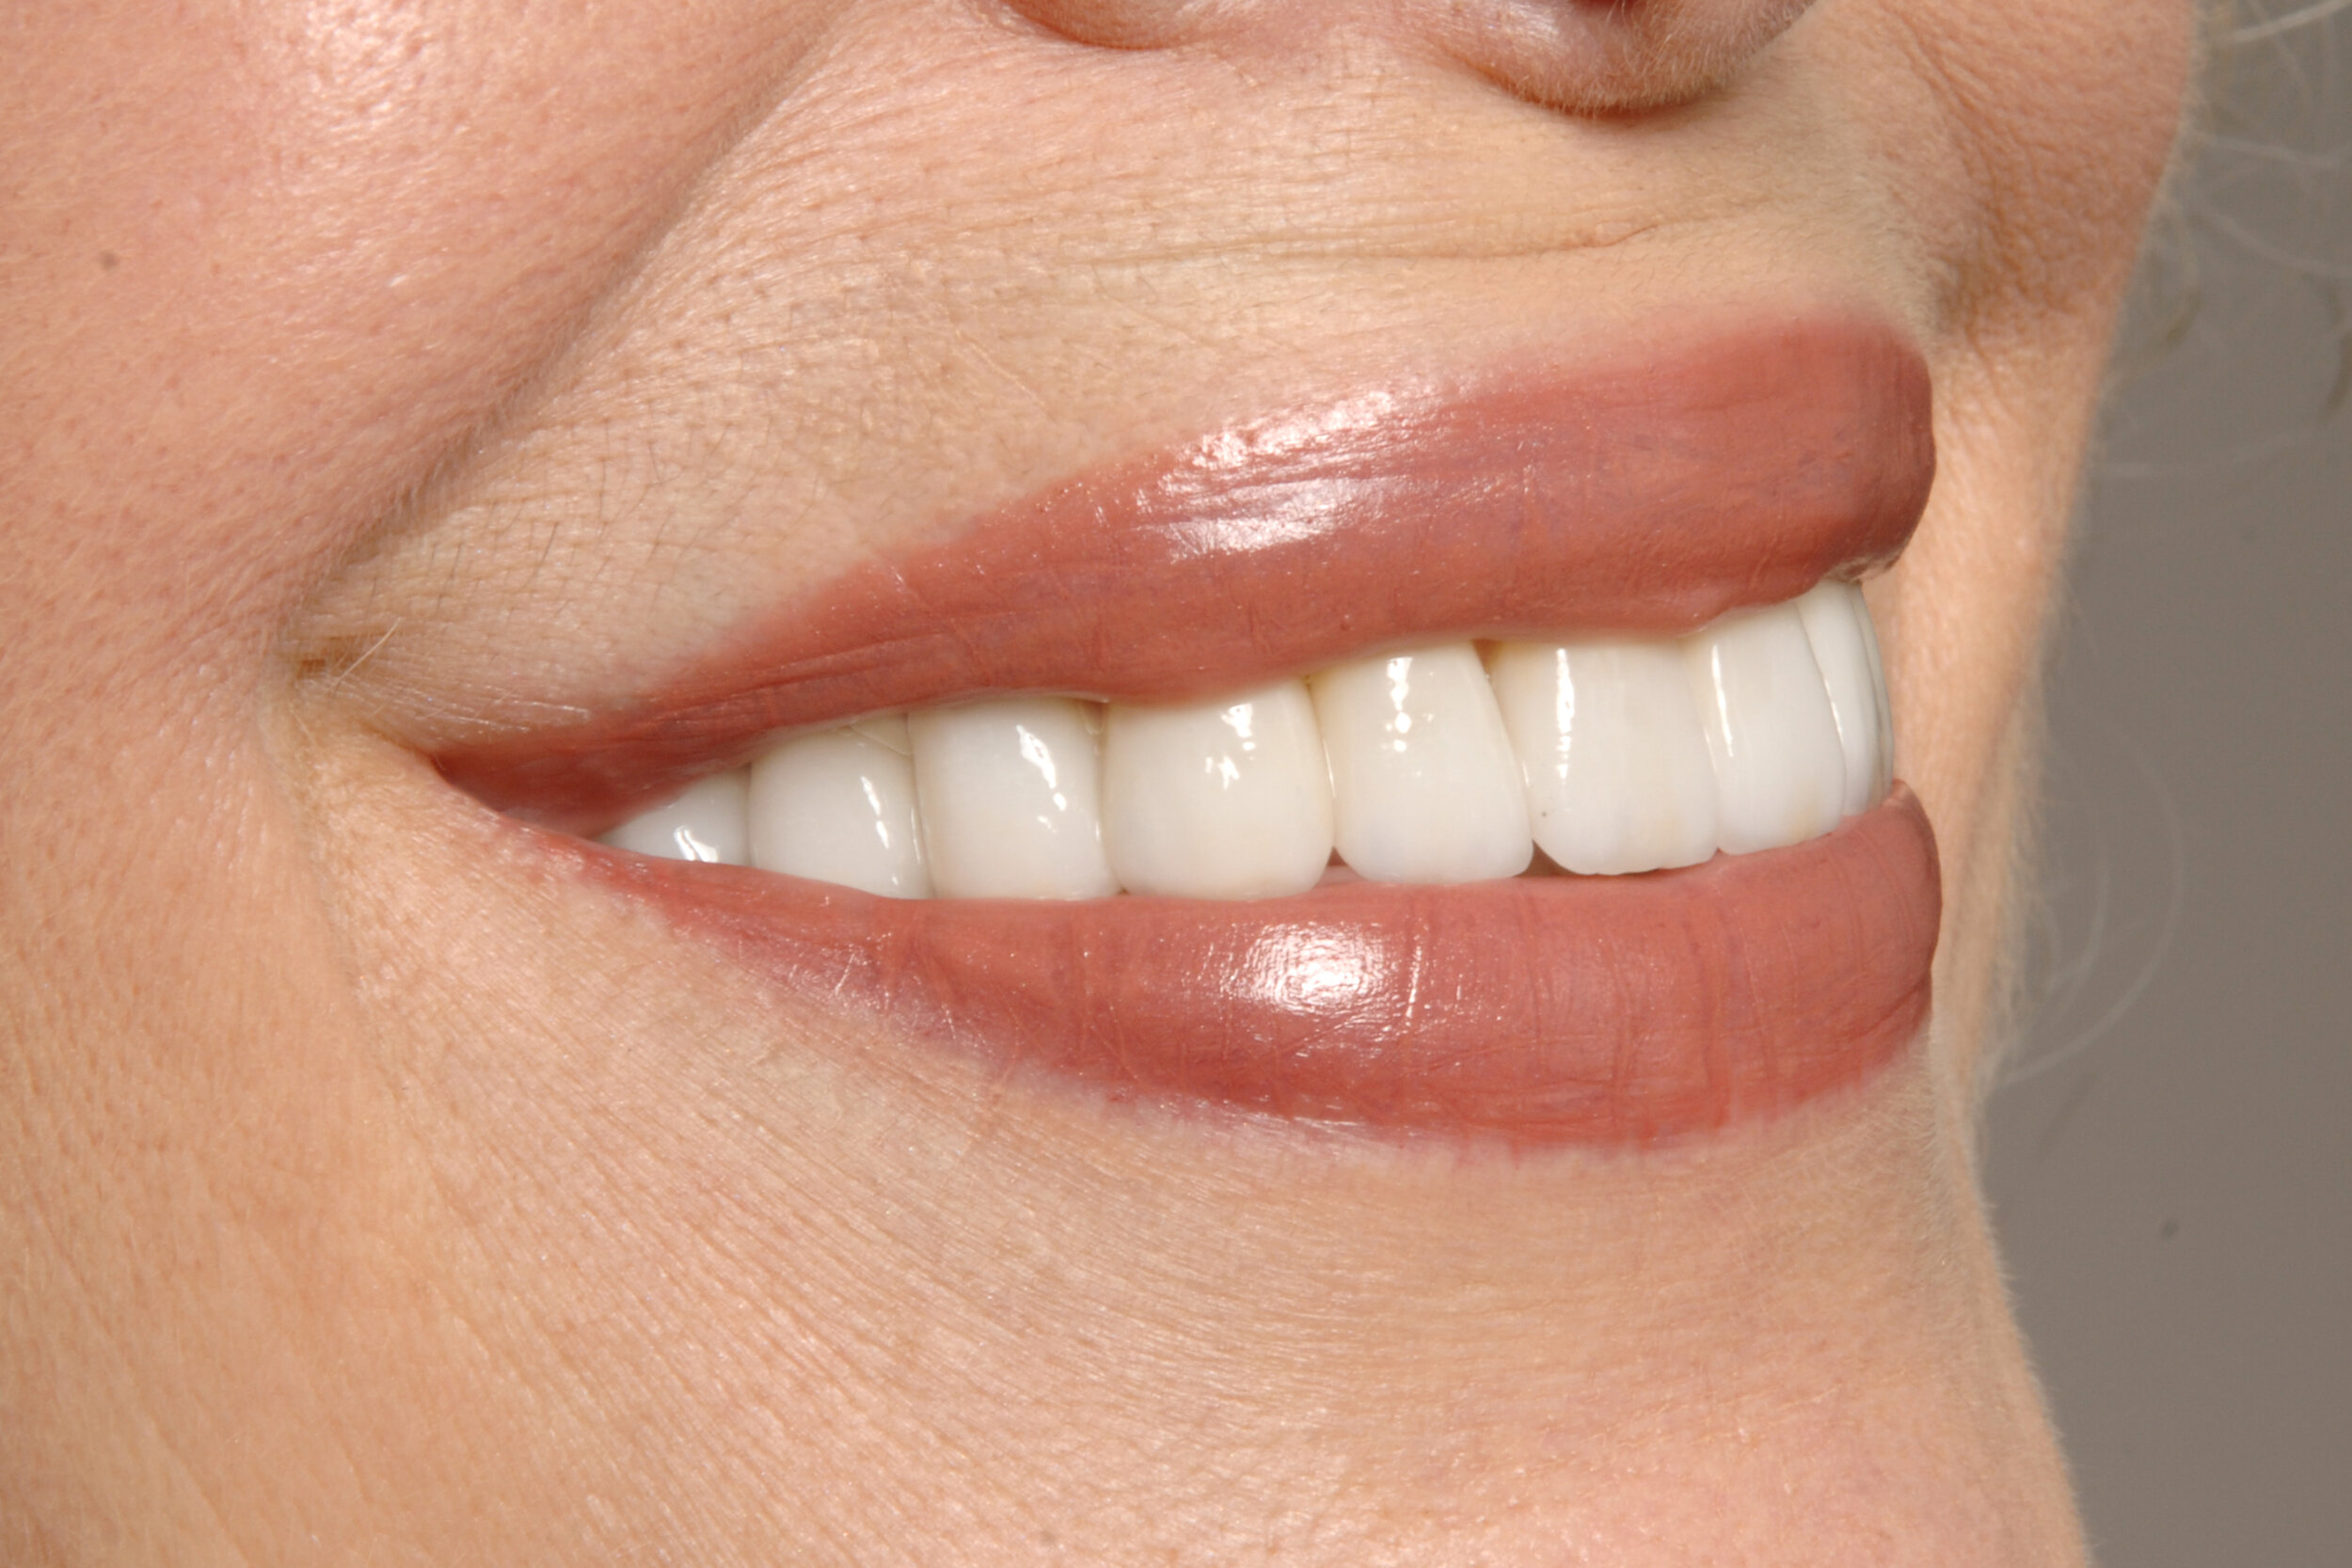  Case 1 - Right side natural smile after full mouth reconstruction 